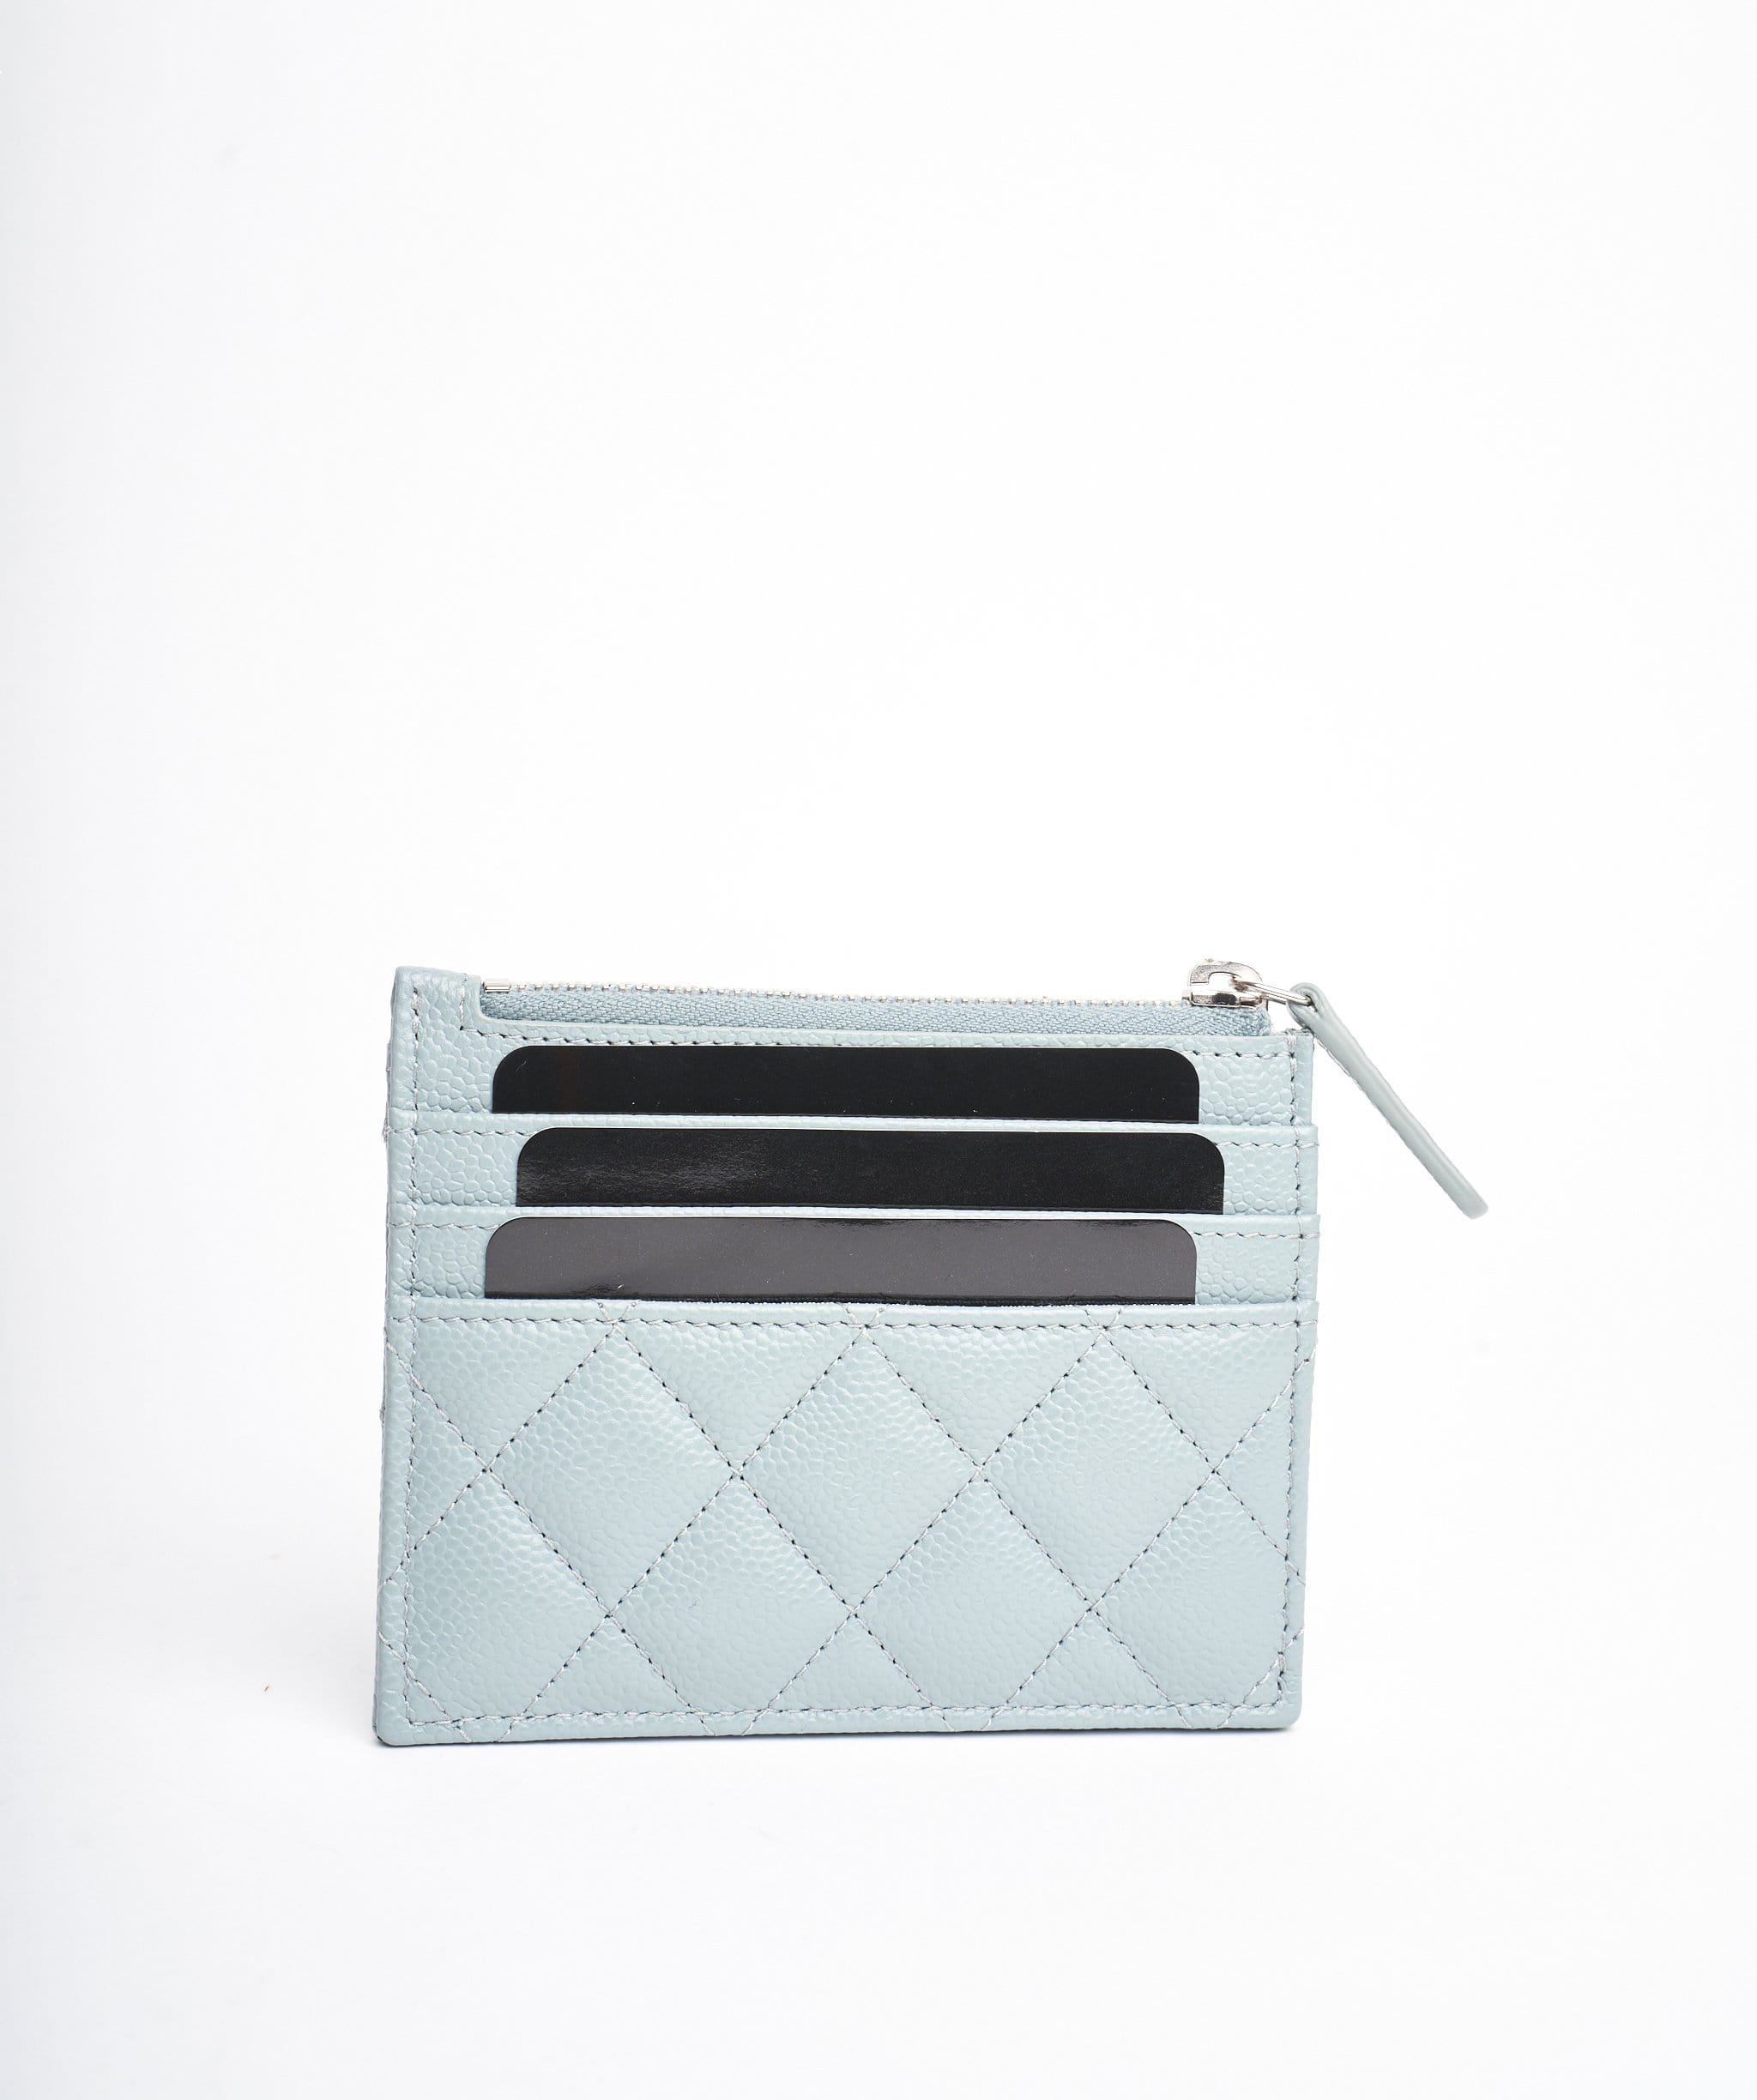 Chanel Chanel caviar quilted card holder in blue